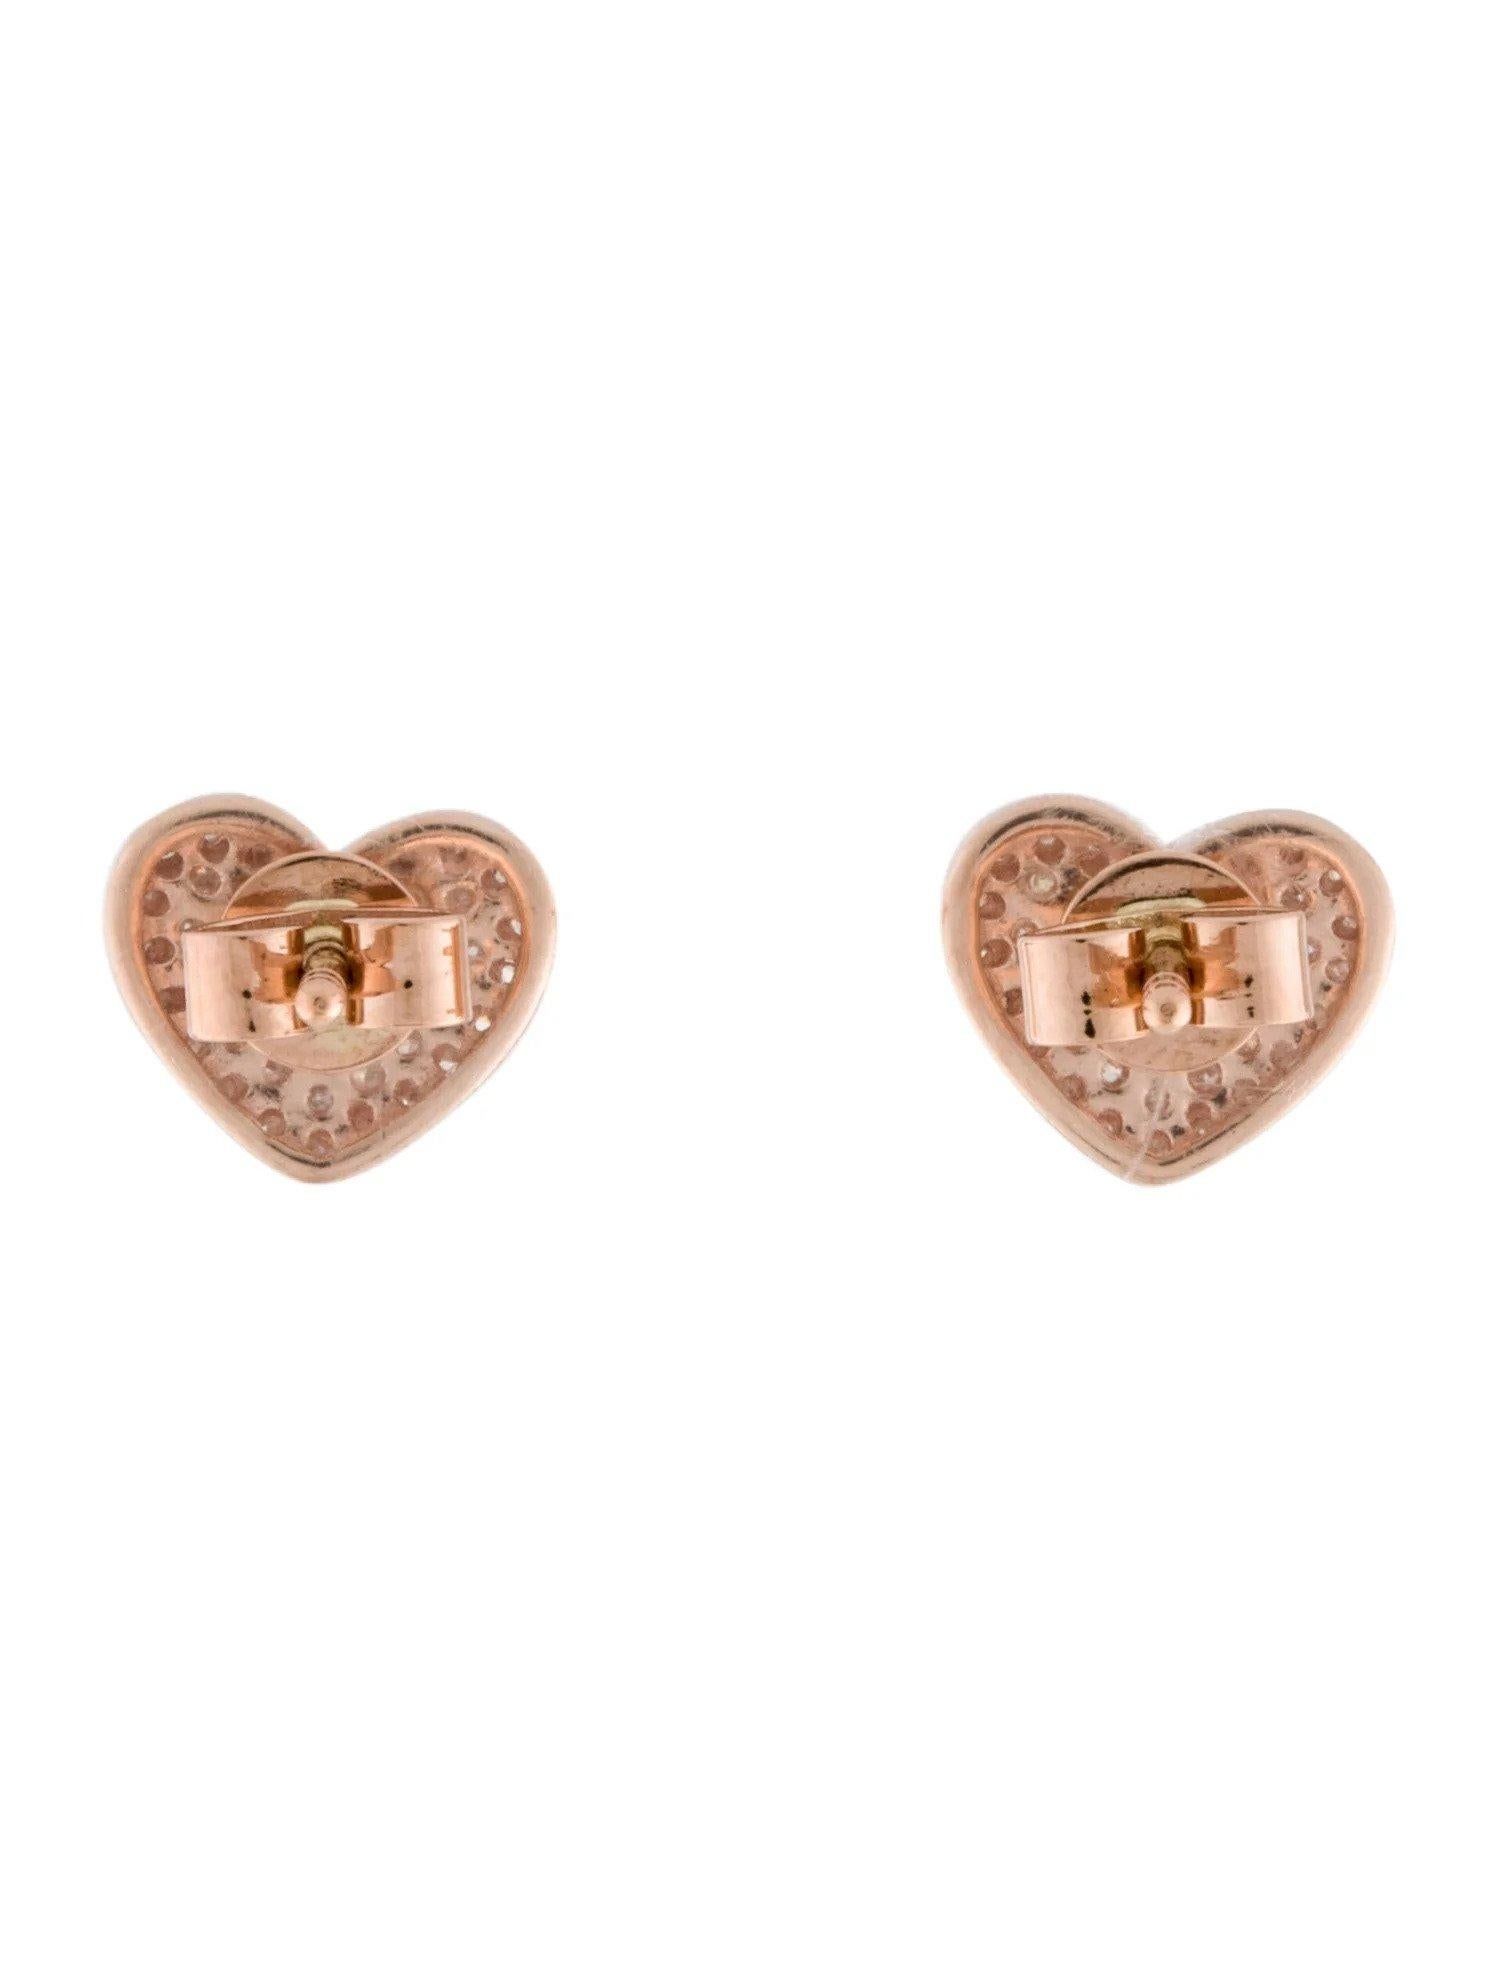 0.25 Carat Diamond Heart Rose Gold Stud Earrings  In New Condition For Sale In Great Neck, NY